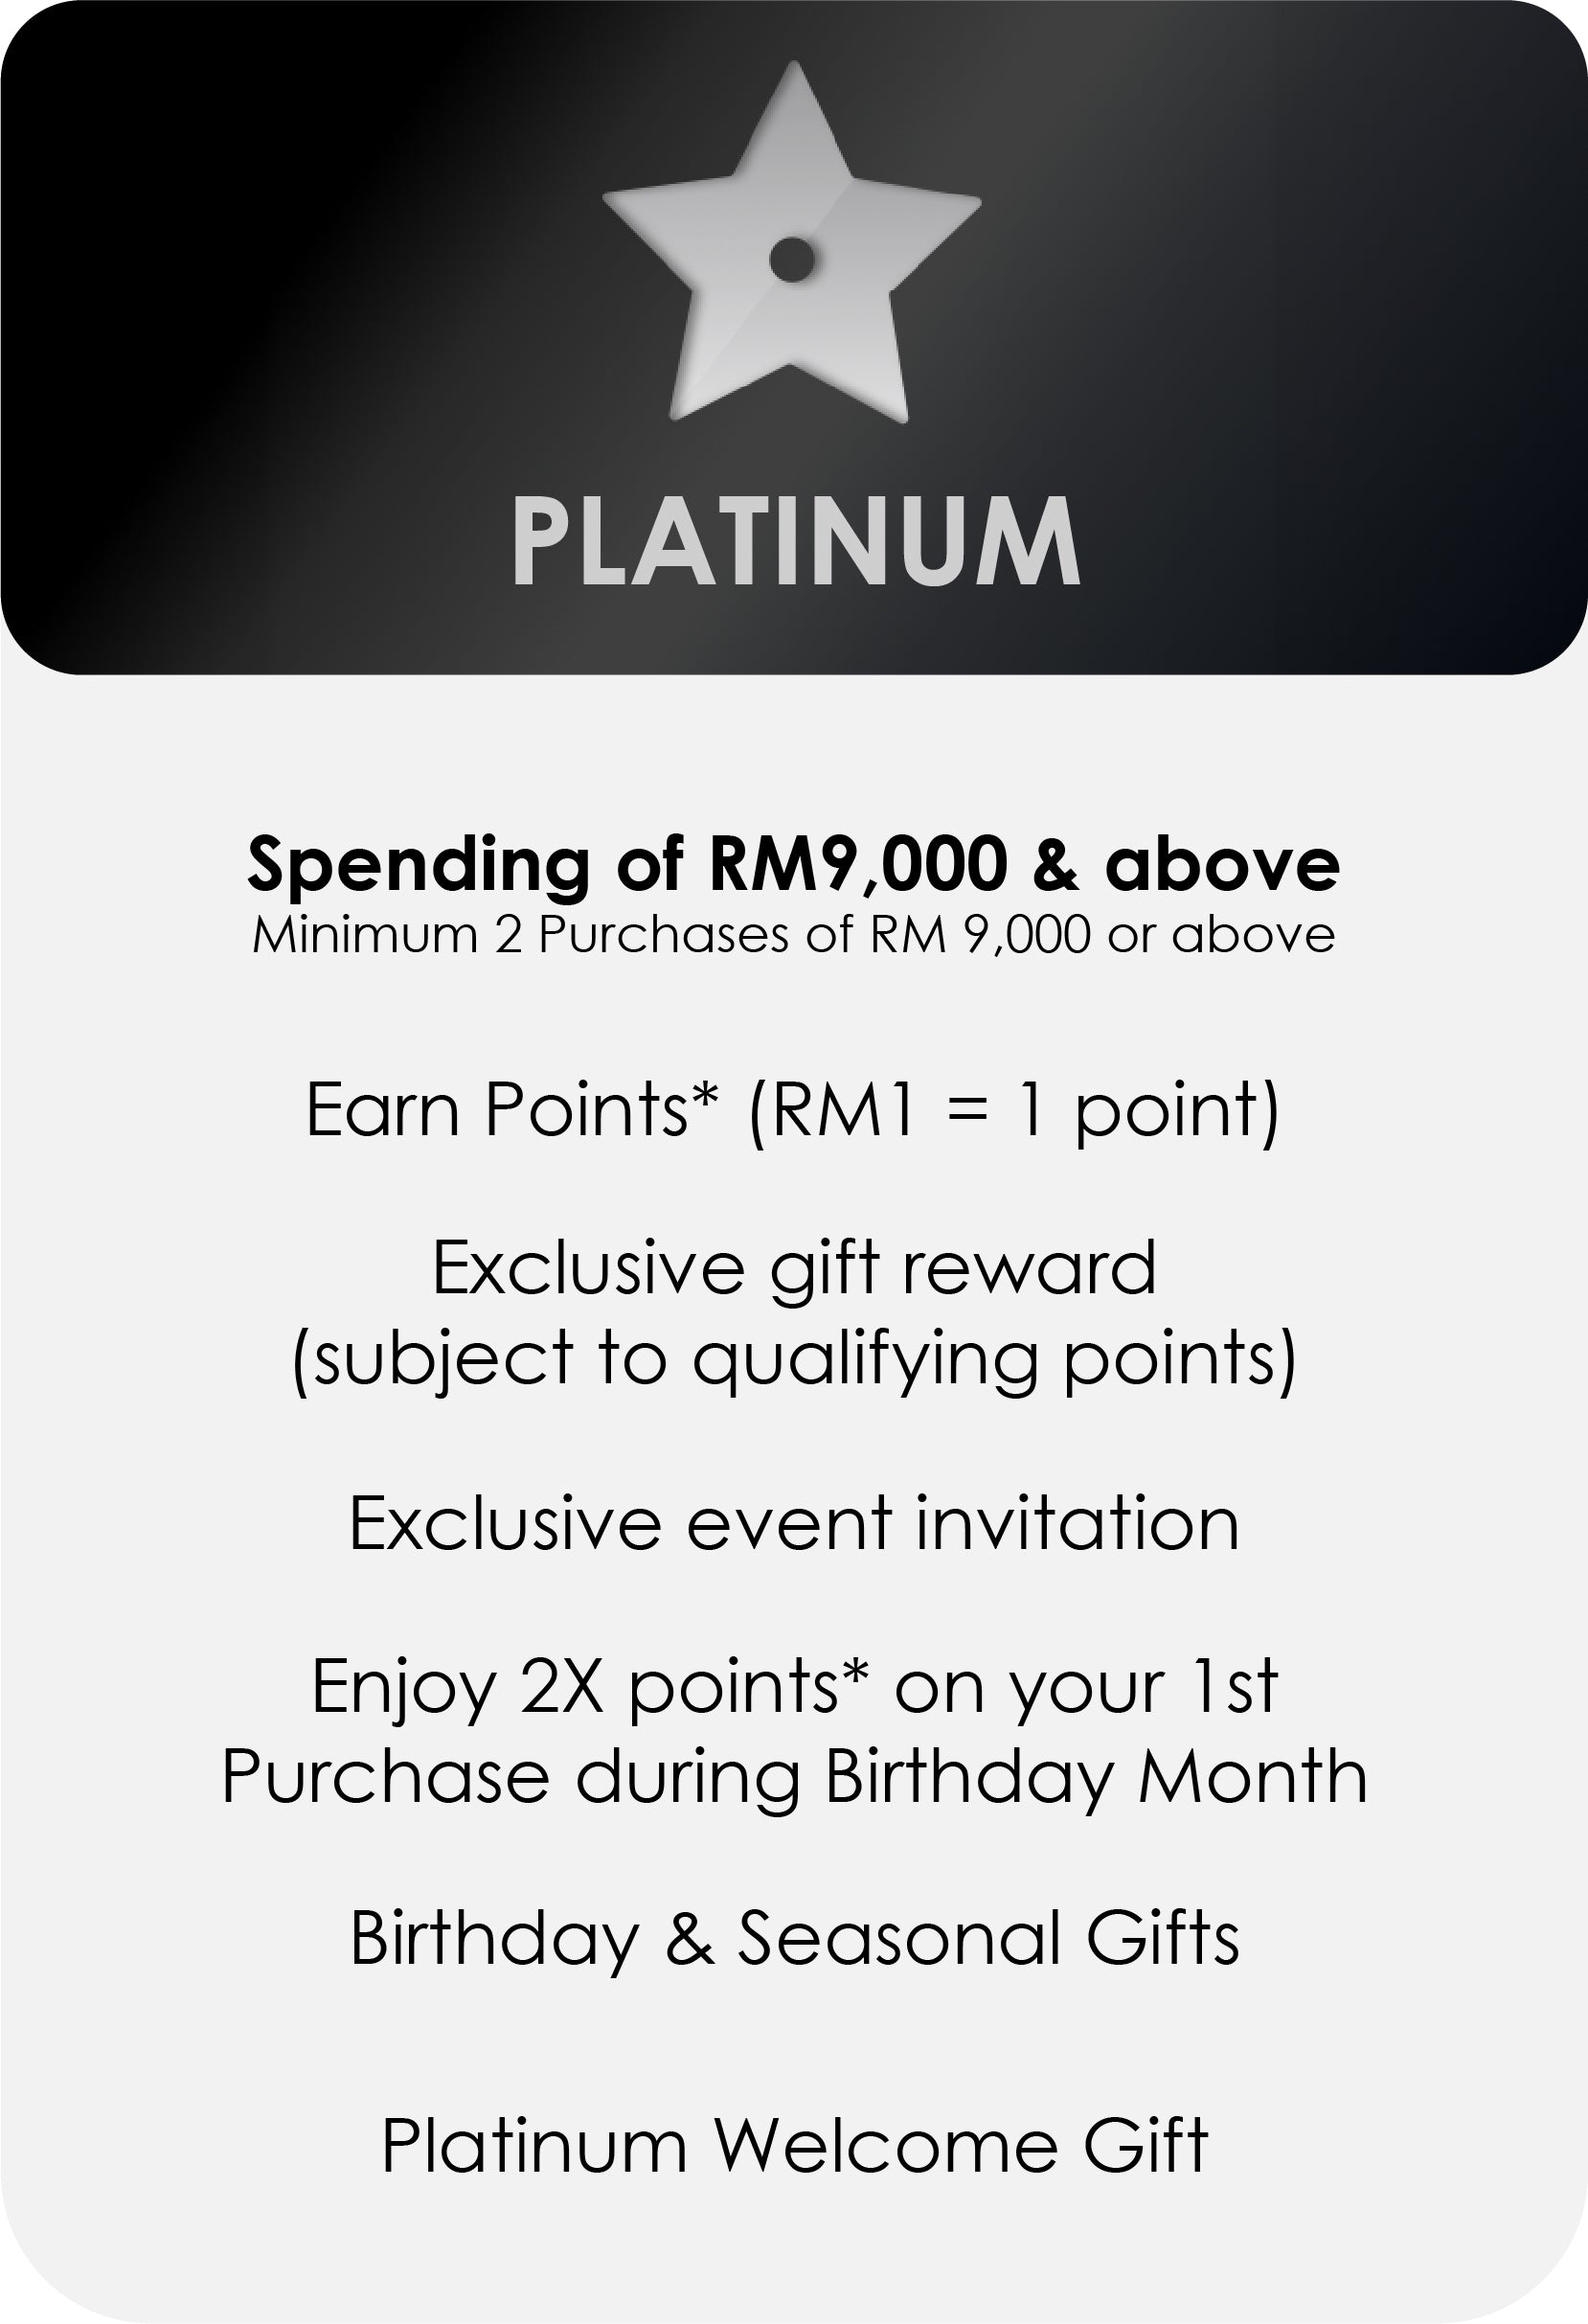 
                PLATINUM
                Spending of RM9,000 & above
                Minimum 2 Purchases of RM 550 or above
                Earn Points* (RM1 = 1 point)
                Exclusive gift reward
                (subject to qualifying points)
                Exclusive event invitation
                Enjoy 2X points* on your 1st
                Purchase during Birthday Month
                Birthday & Seasonal Gifts
                Platinum Welcome Gift
              